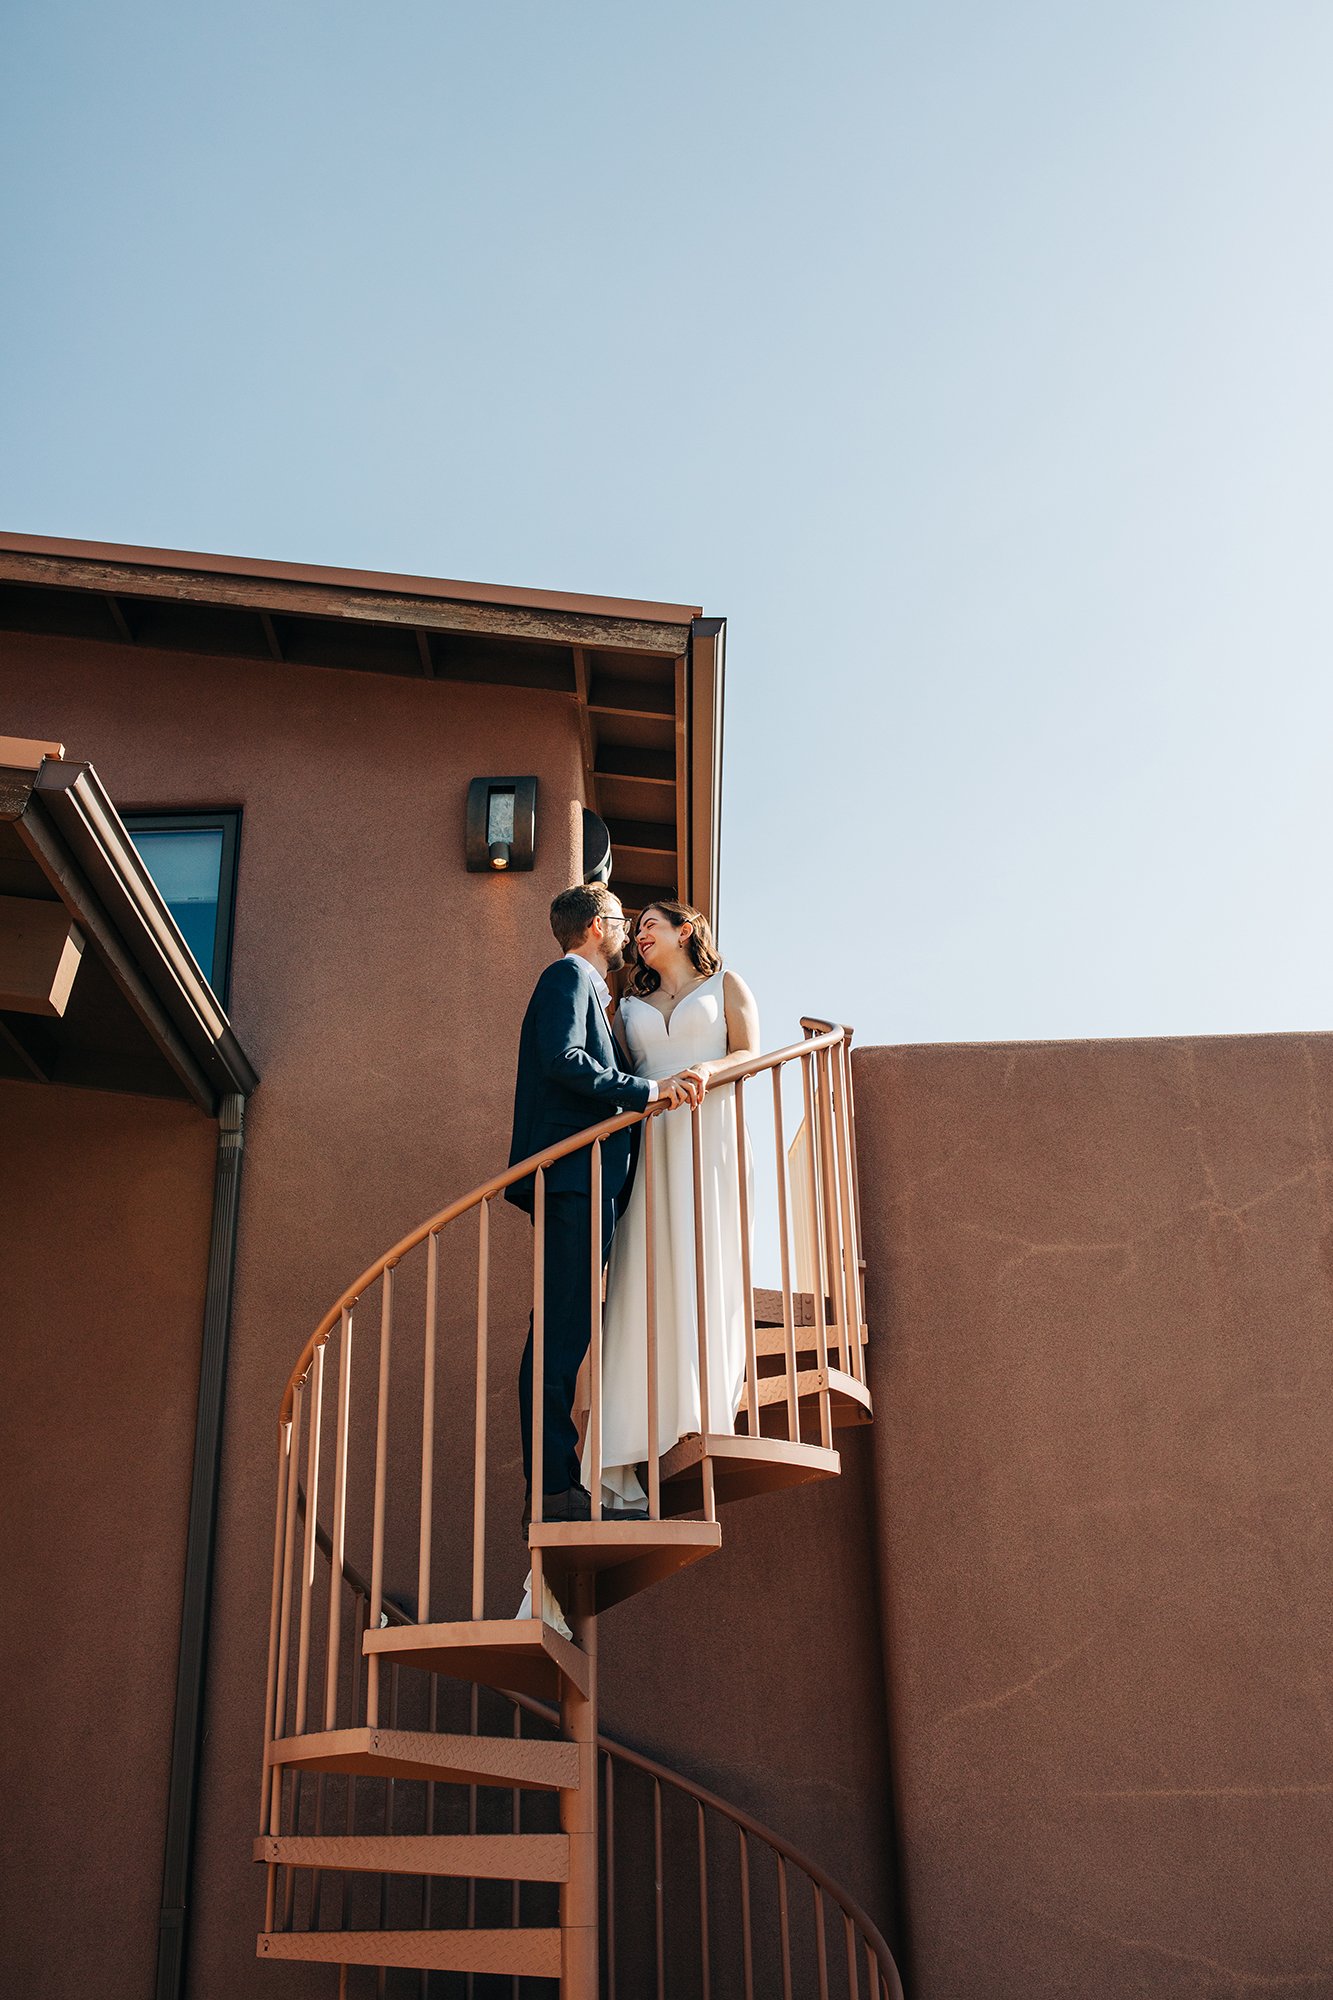 Newly wed couple, Stephanie and Matthew, get close on a spiral staircase for their outdoor wedding in Sedona Arizona